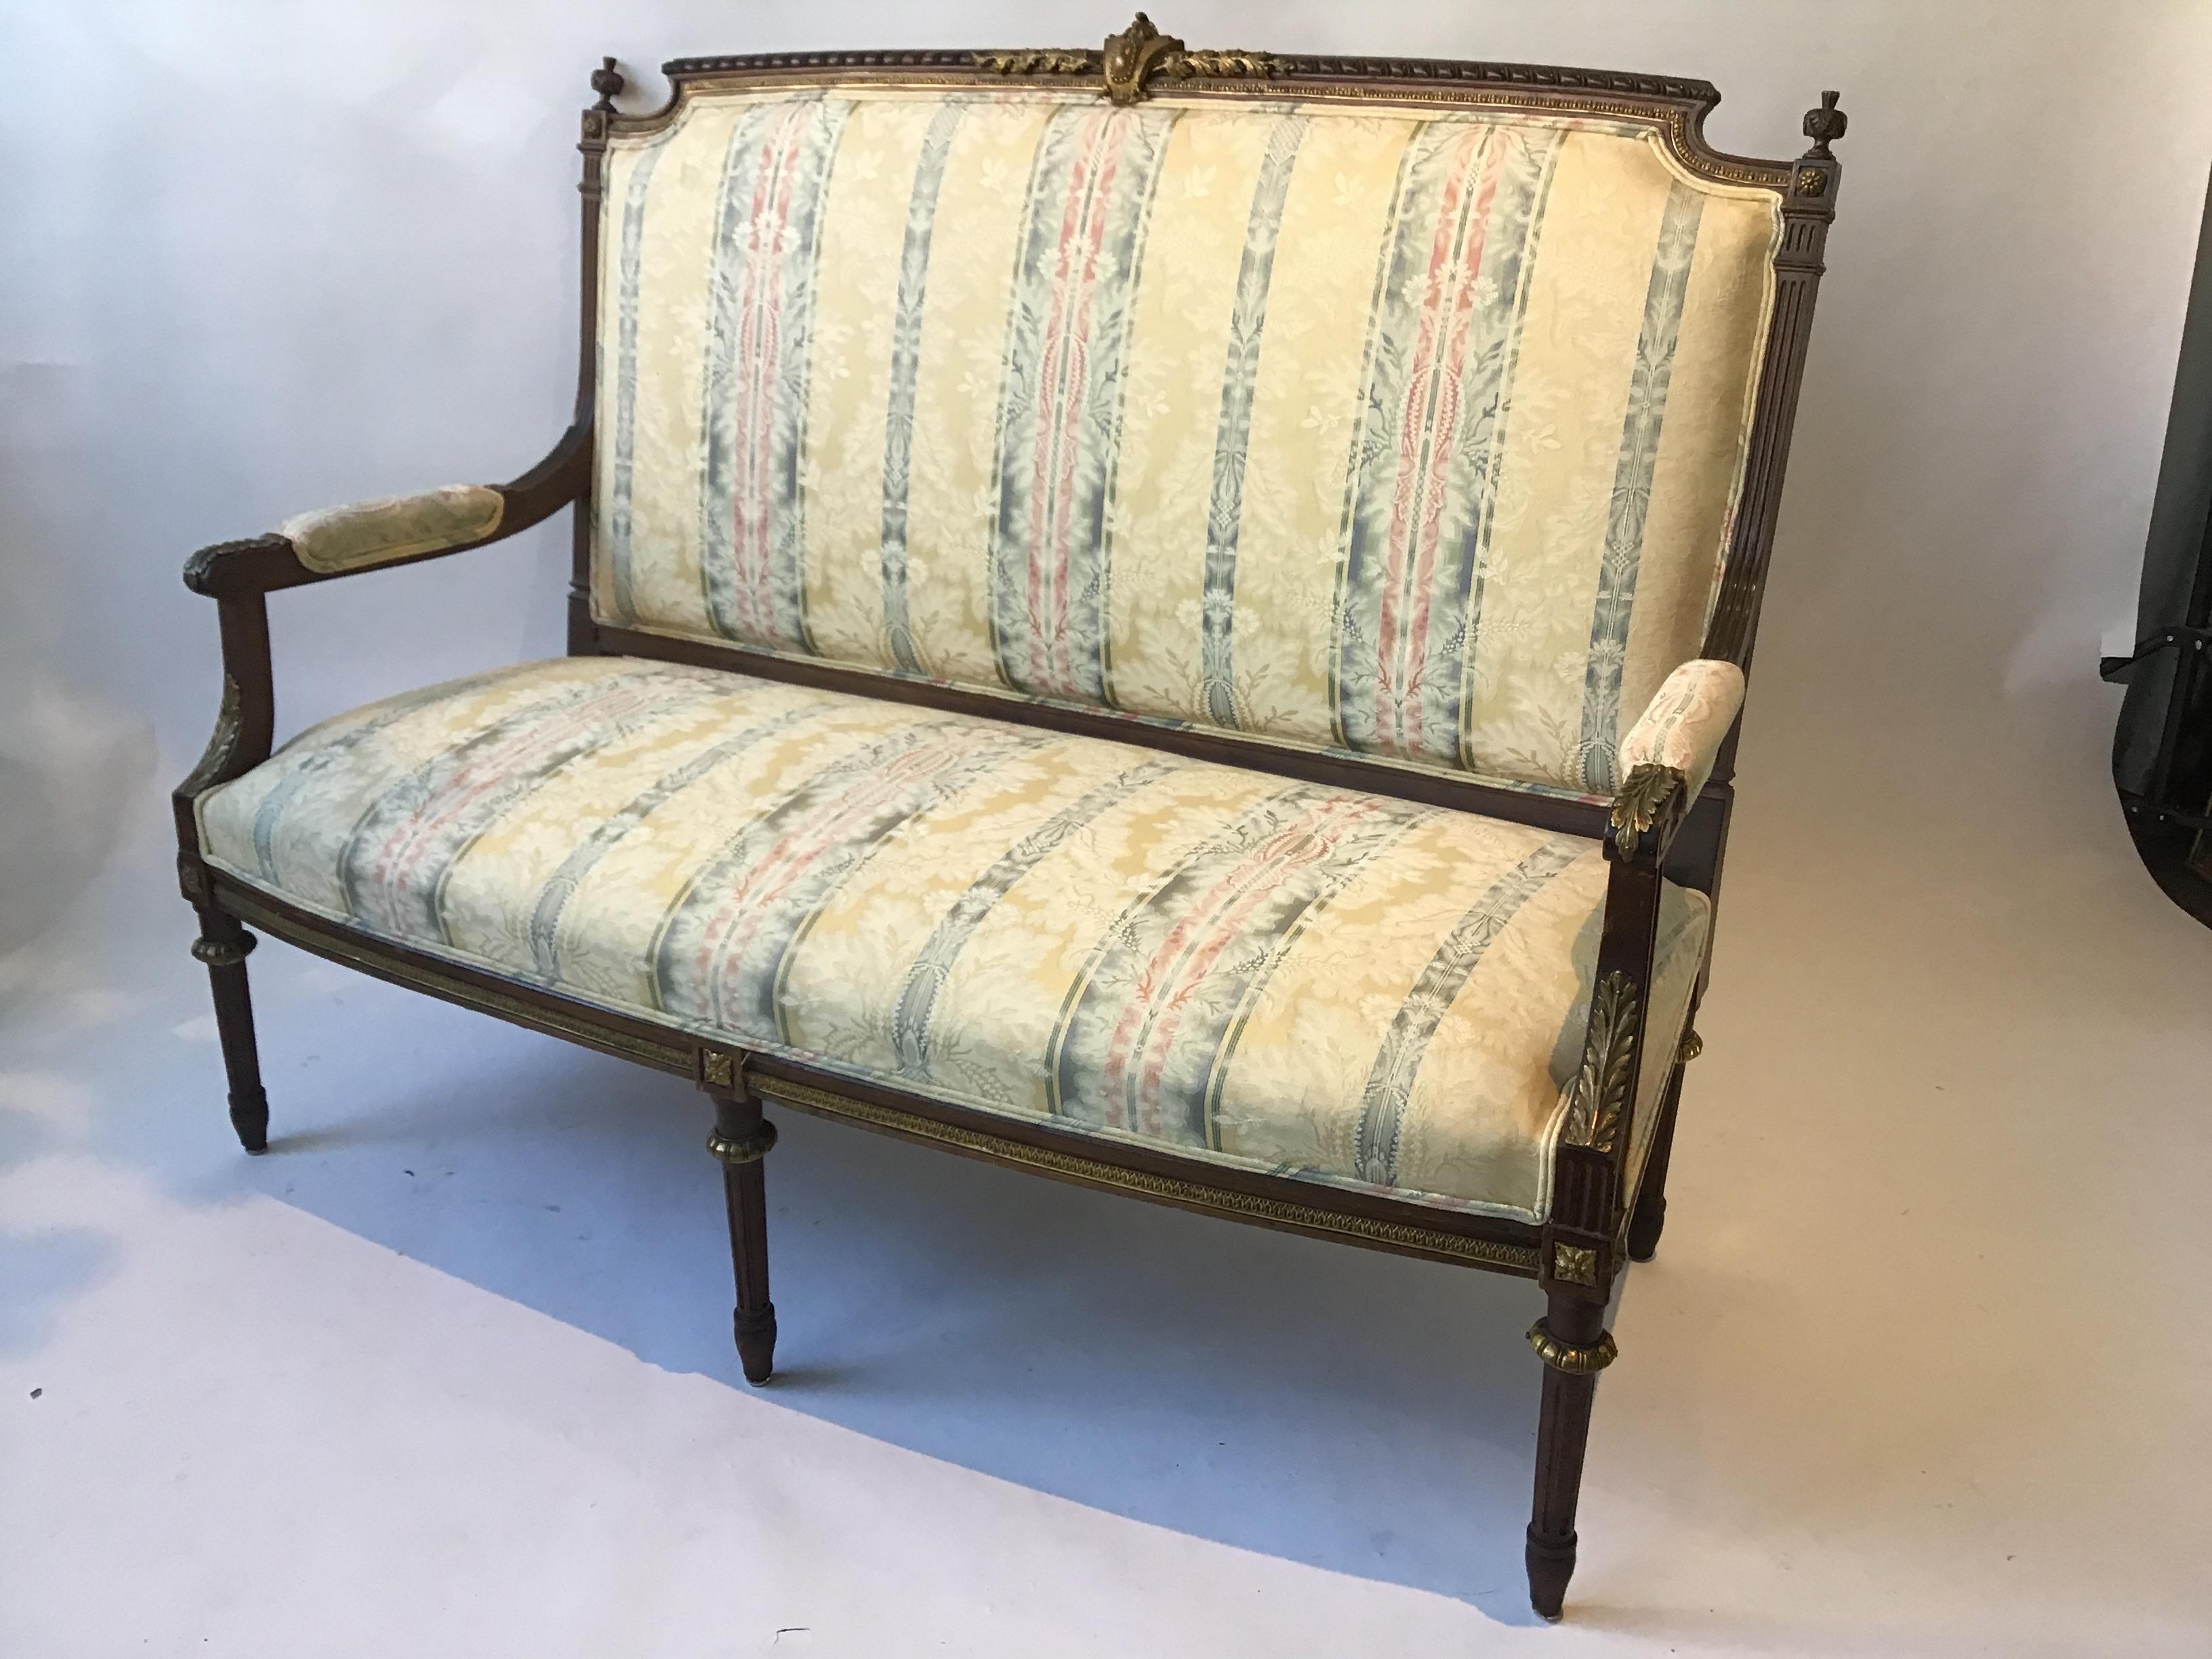 1920s French Louis XVI wood settee covered in bronze. All the gold accent pieces on the settee are bronze.